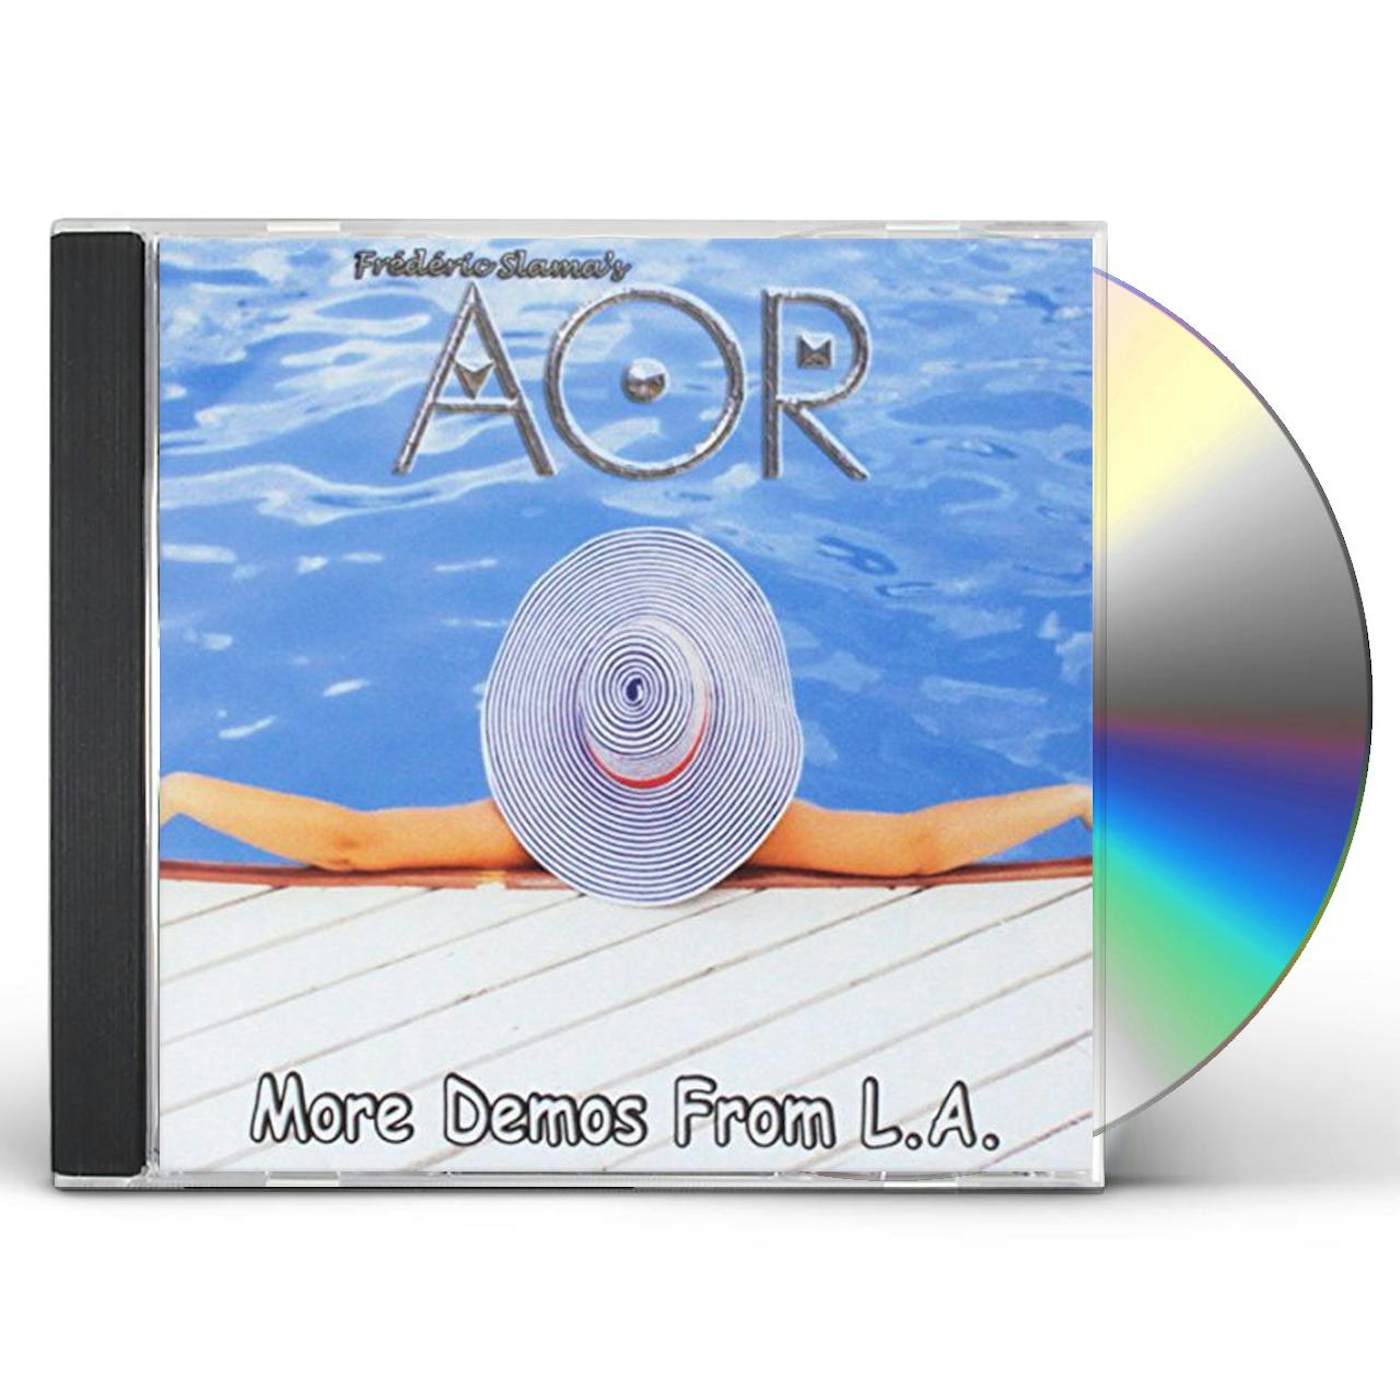 AOR MORE DEMOS FROM L.A. CD